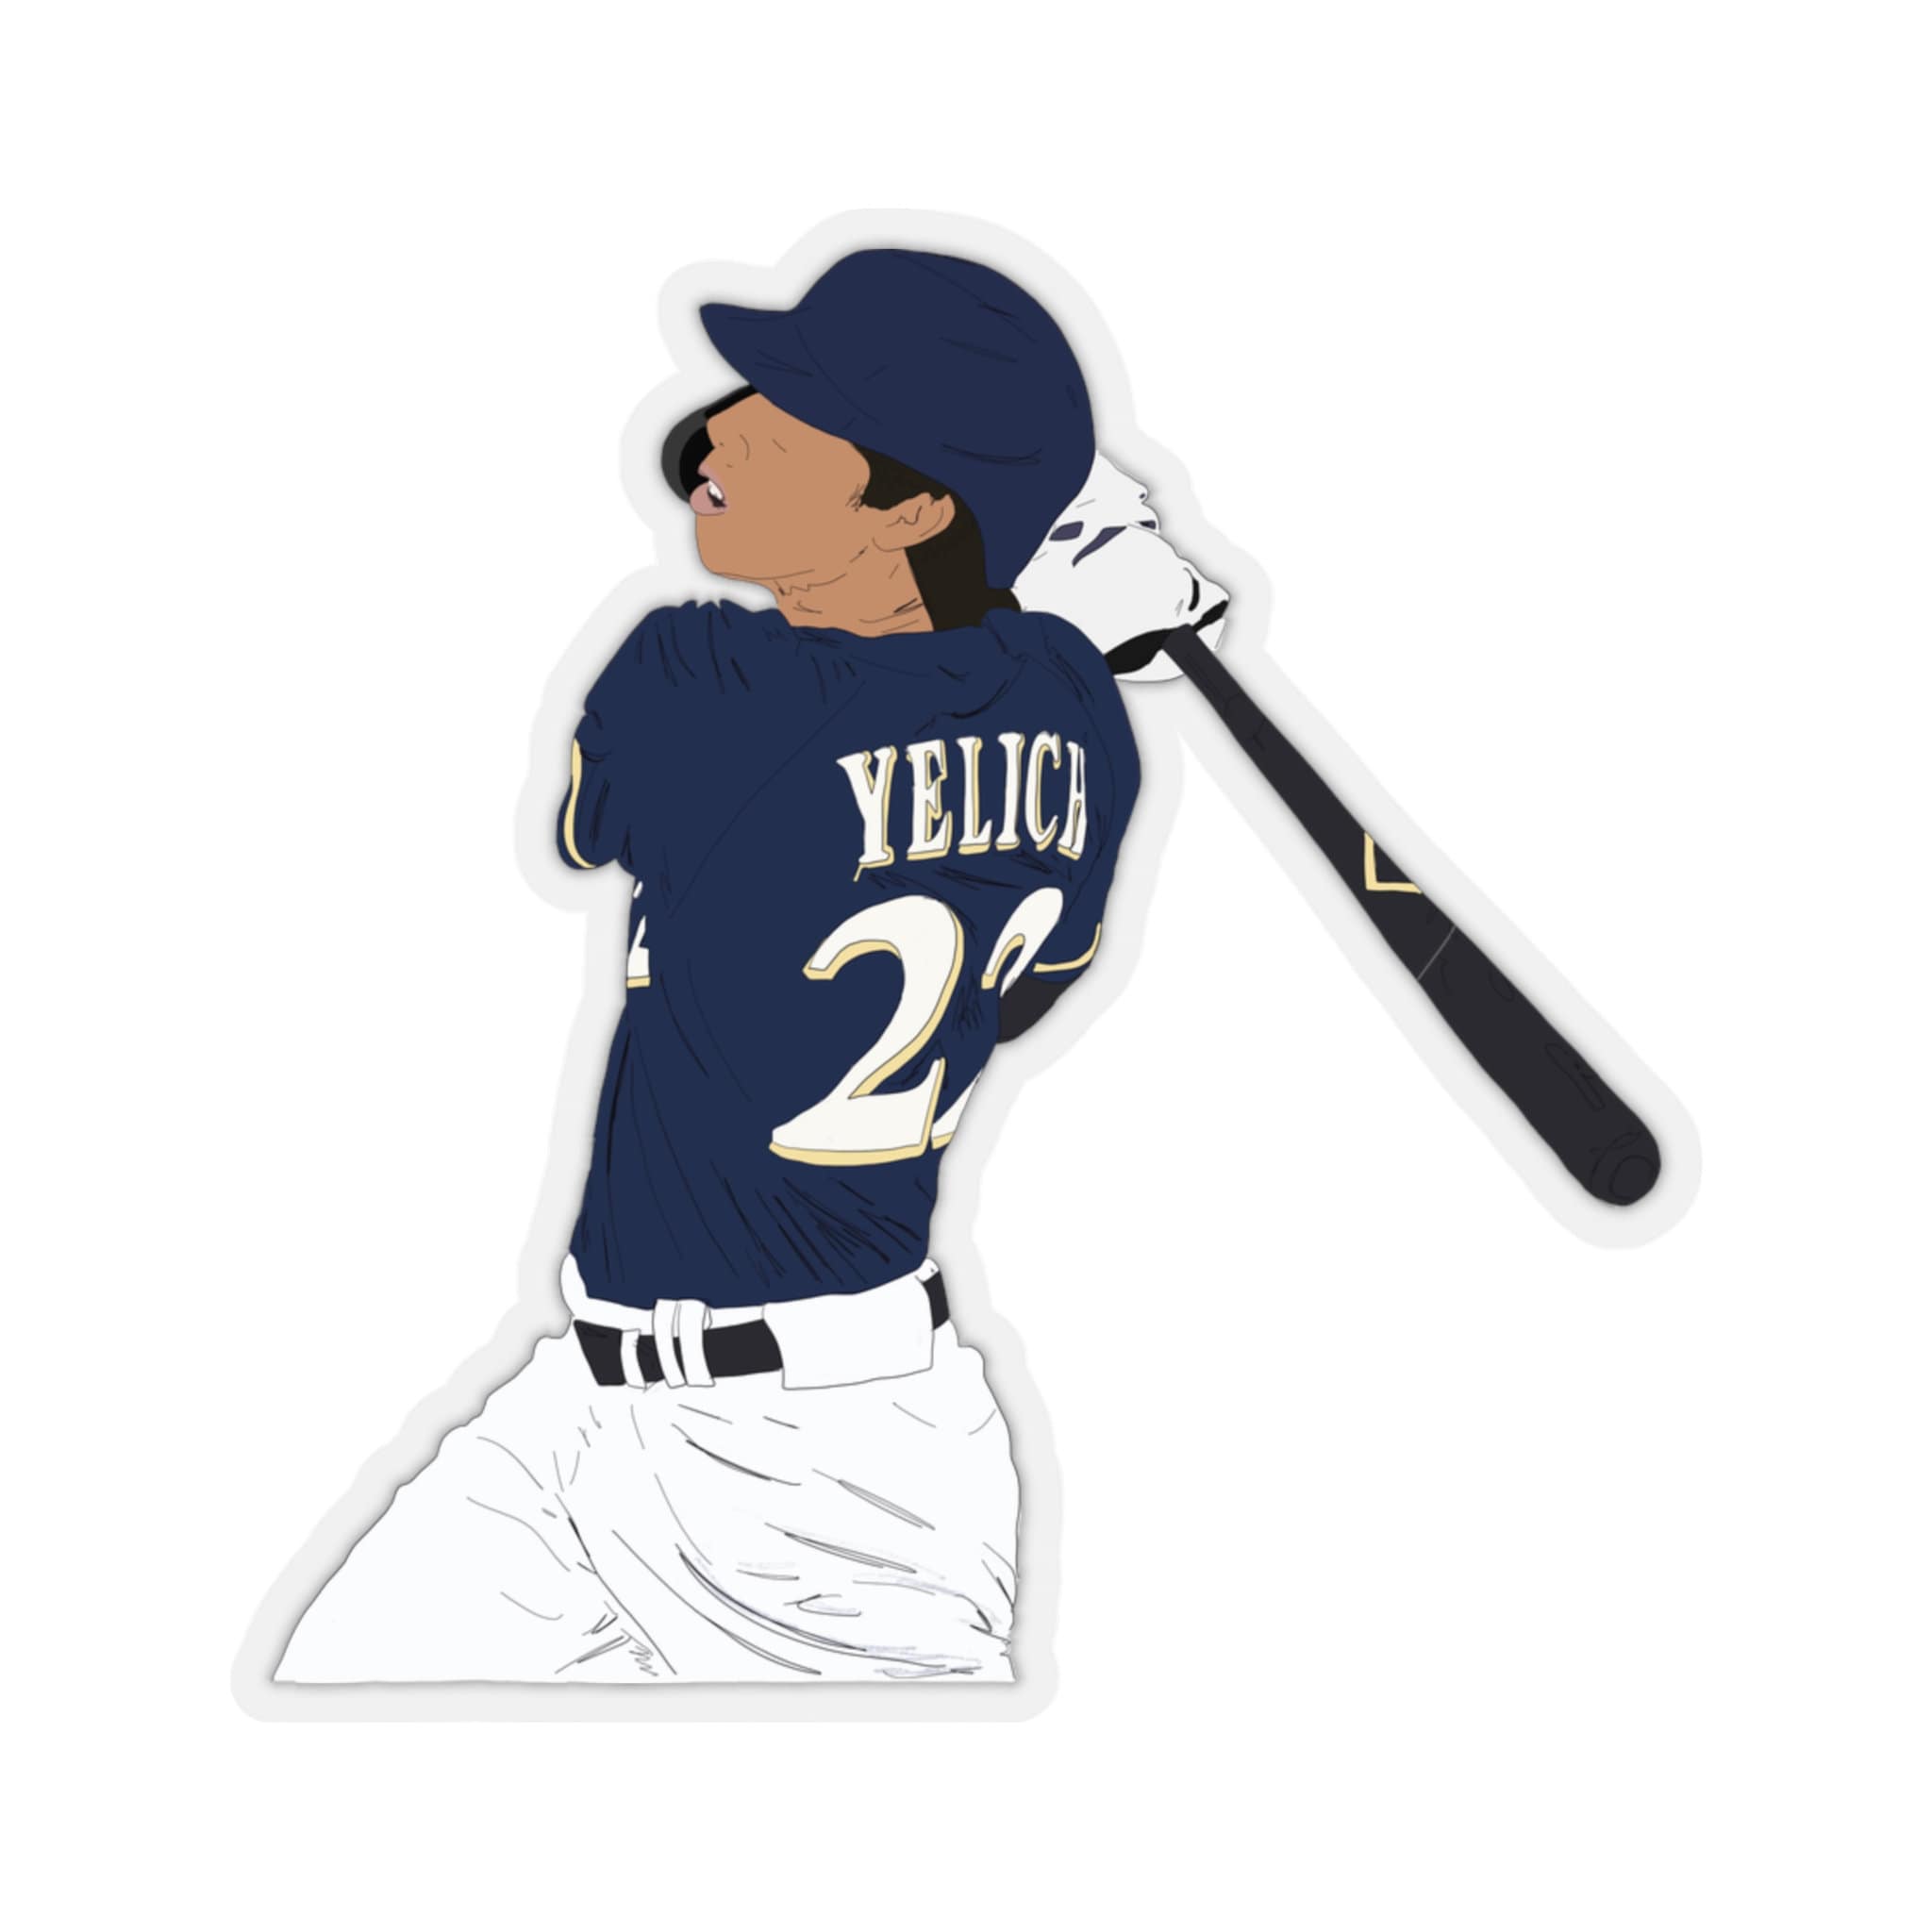 Christian Yelich Drawing Kiss-cut Stickers 